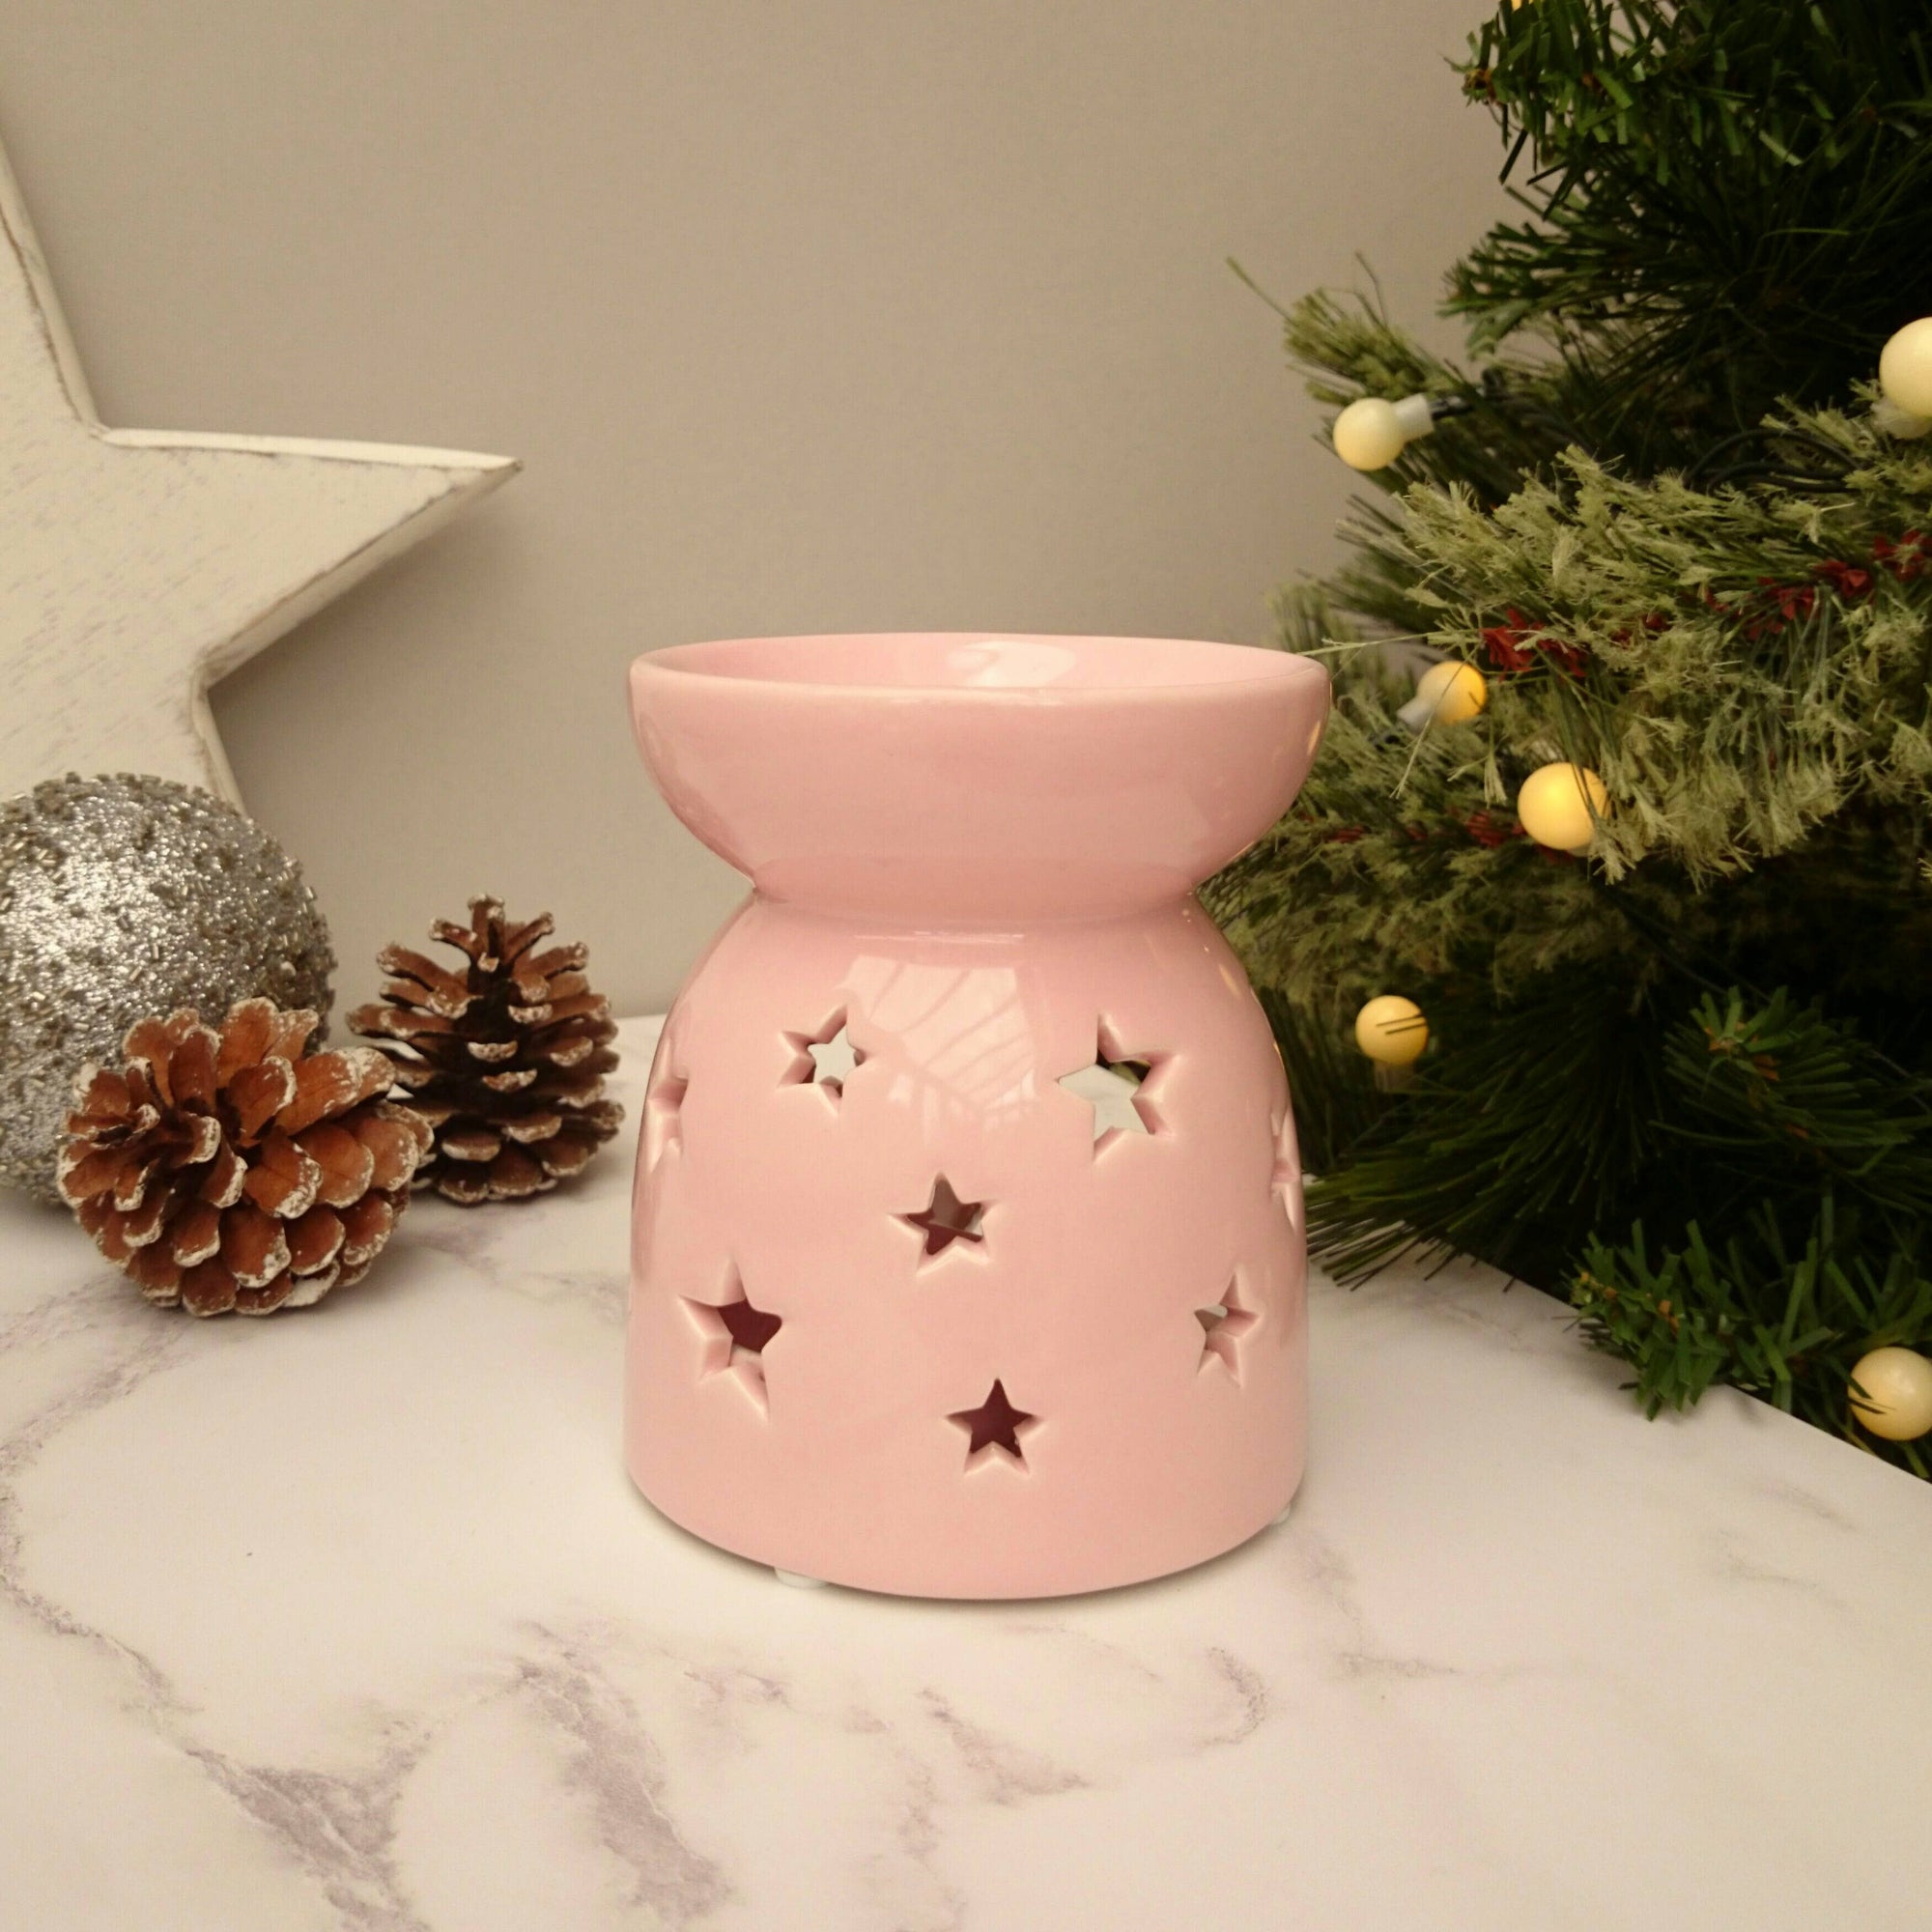 Star Cutout Burner with Tealight Spoon - Pink